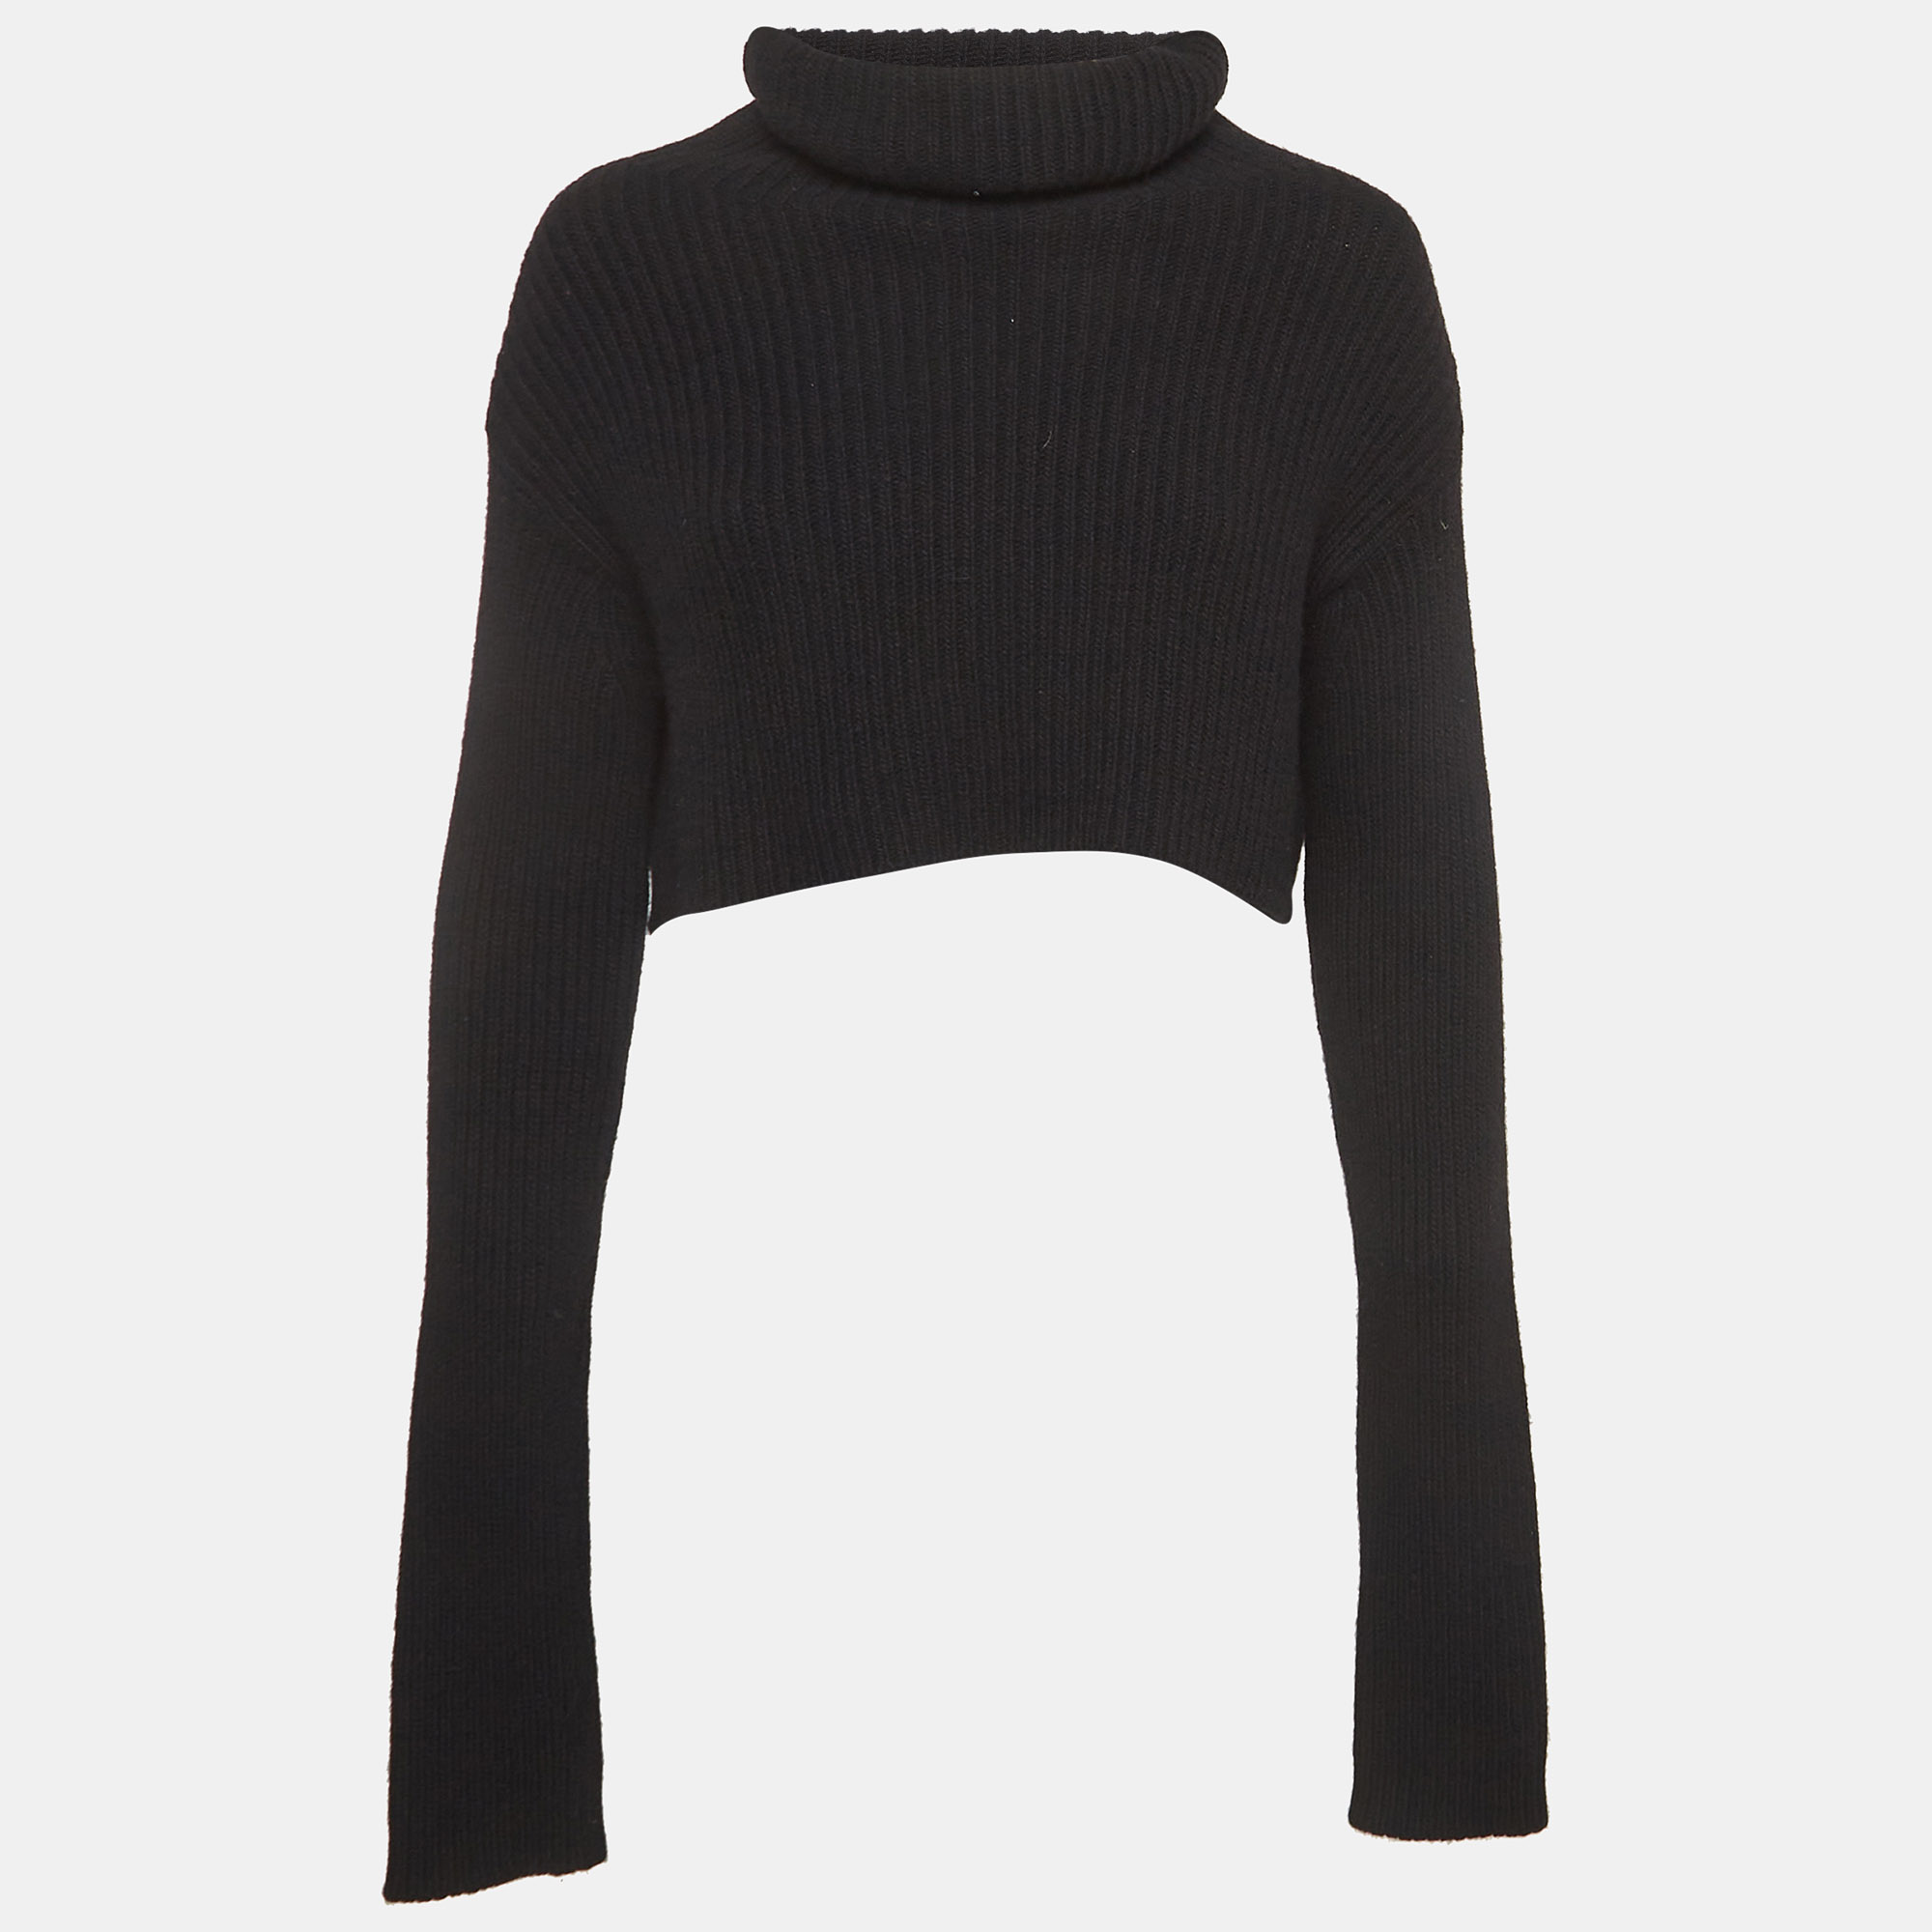 Pre-owned Valentino Black Wool & Cashmere Knit Turtle Neck Top M